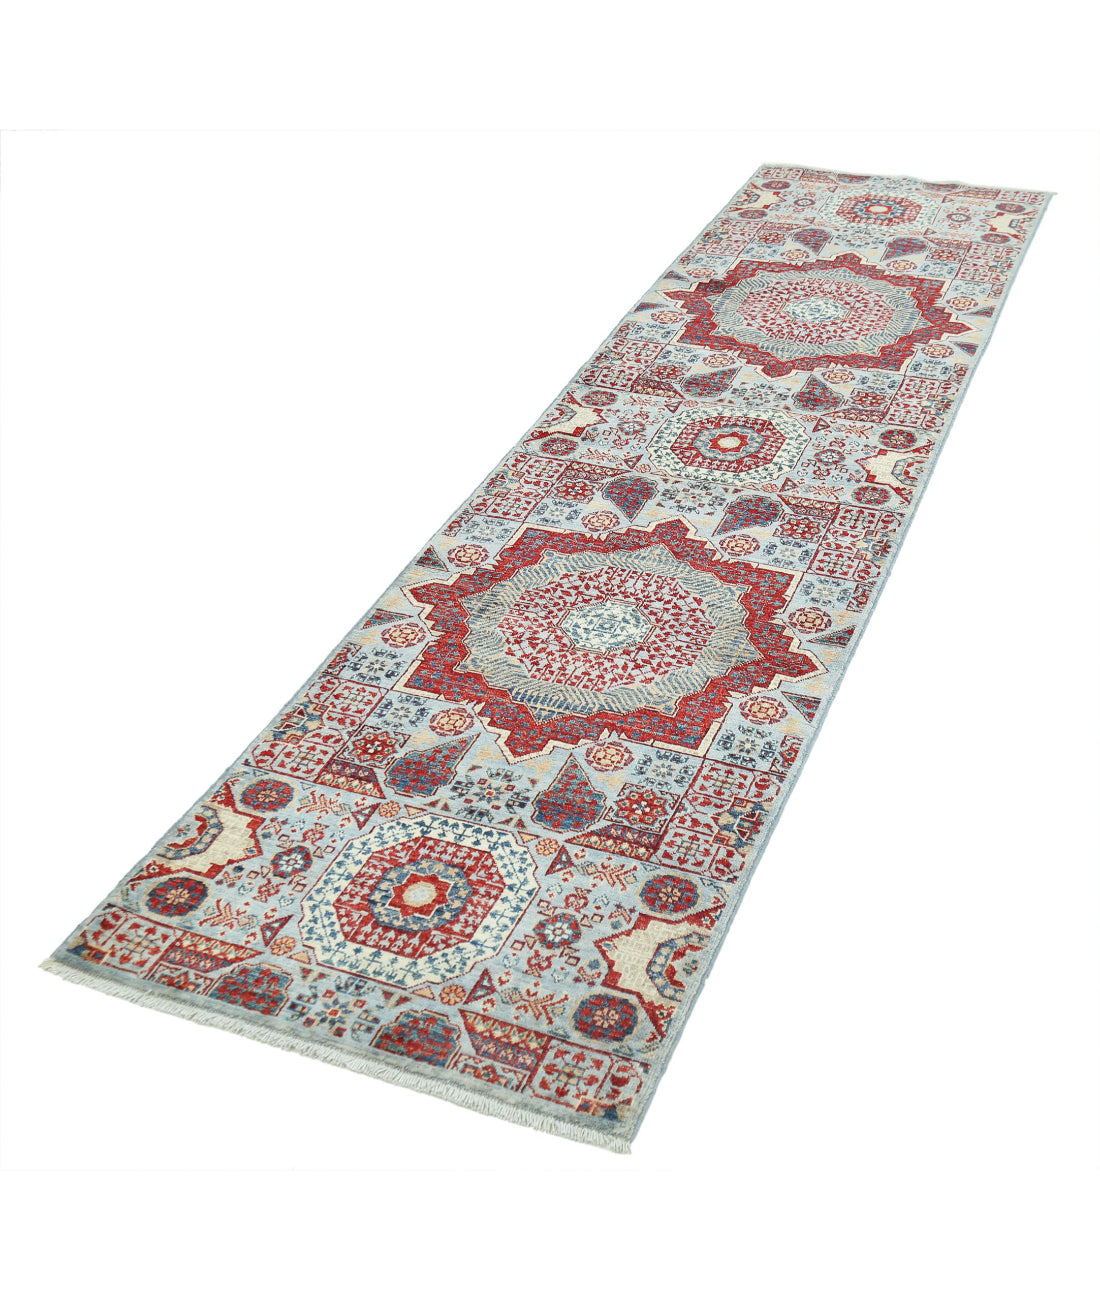 Hand Knotted Mamluk Wool Rug - 2'5'' x 9'8'' 2'5'' x 9'8'' (73 X 290) / Blue / Red